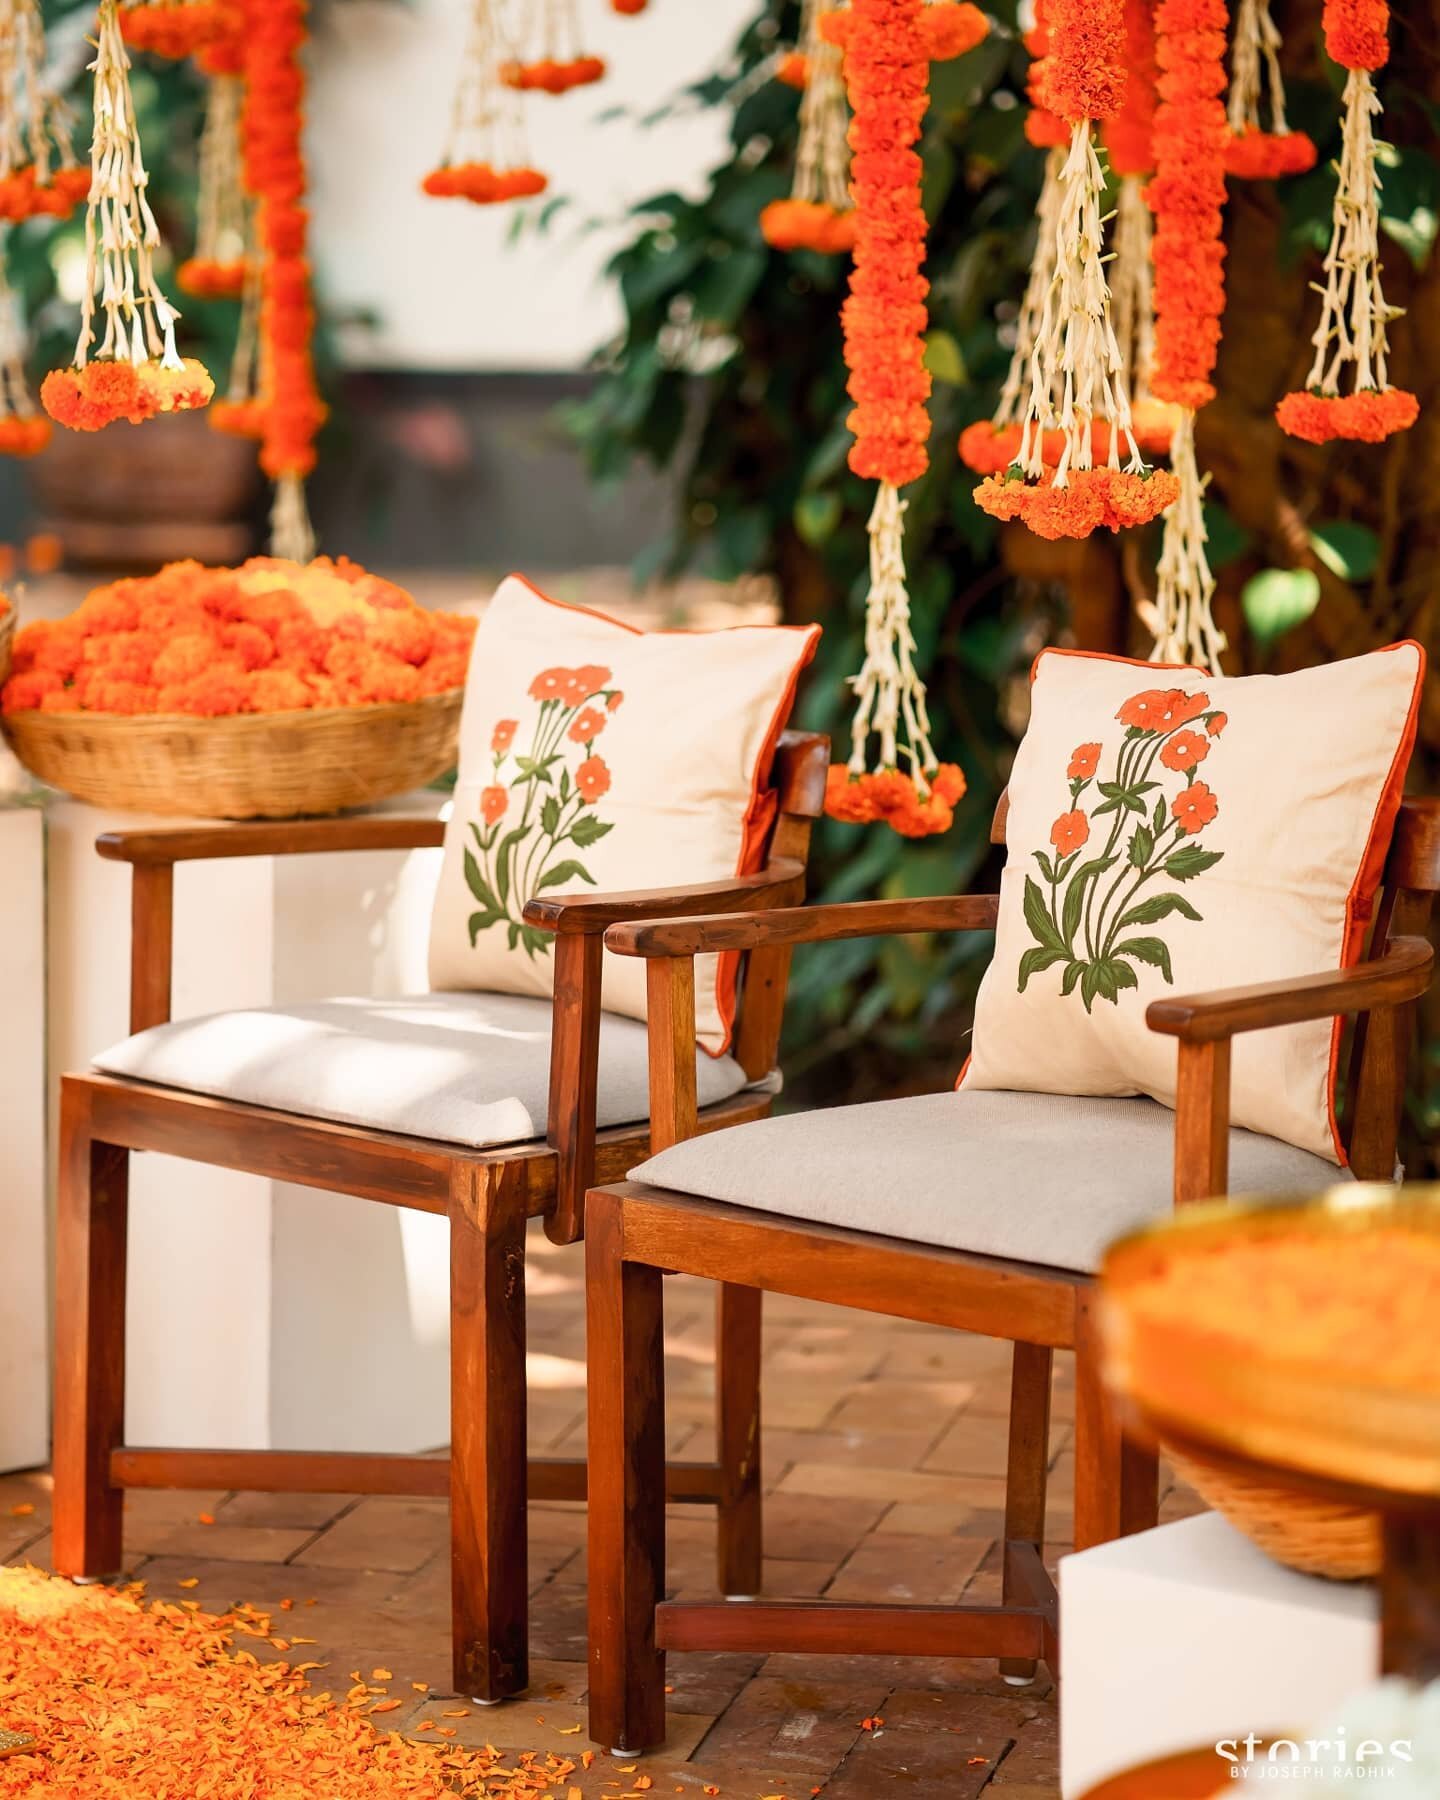 A union of two cultures, the haldi resonated Sanjanas Tamil heritage. The banyan tree draped with marigolds formed the perfect backdrop to the ceremony.

Sanjana + Jasprit
March, 2021 
With  @theweddingfilmer @storiesbyjosephradhik

#weddingsbydevika